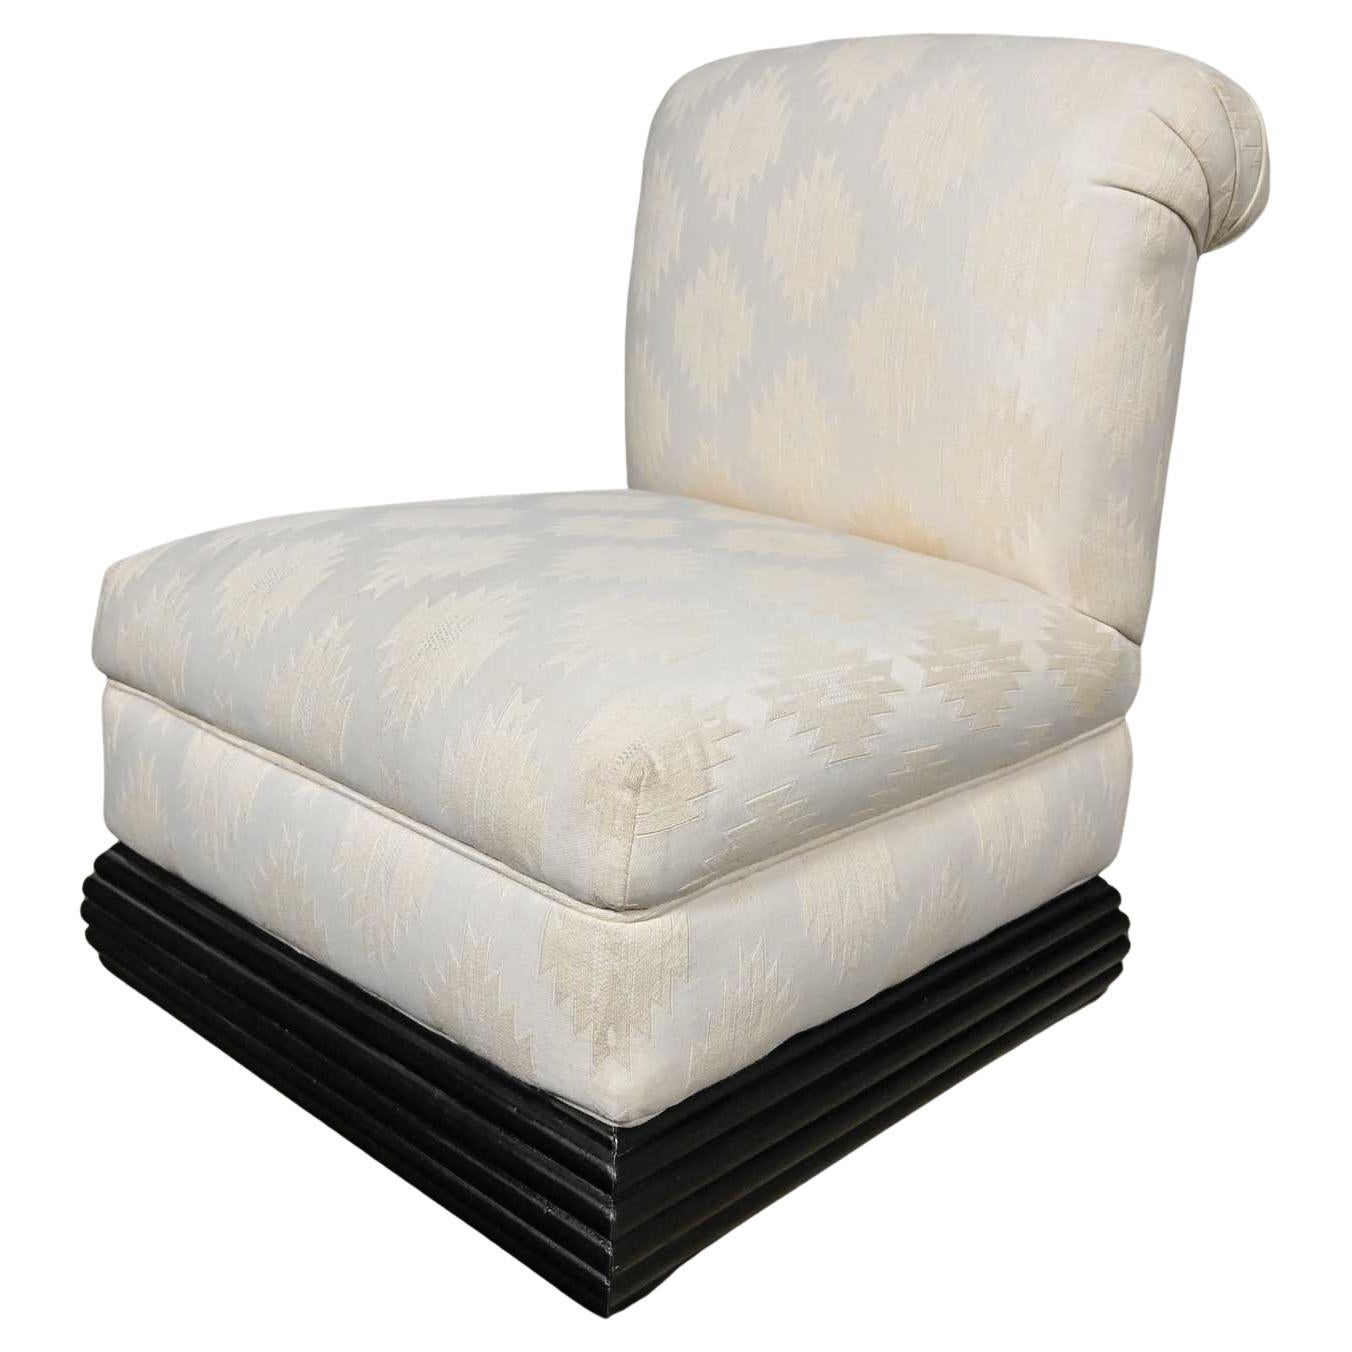 Late 20th Art Deco Revival off White Slipper Chair Rolled Back & Black Wood Base For Sale